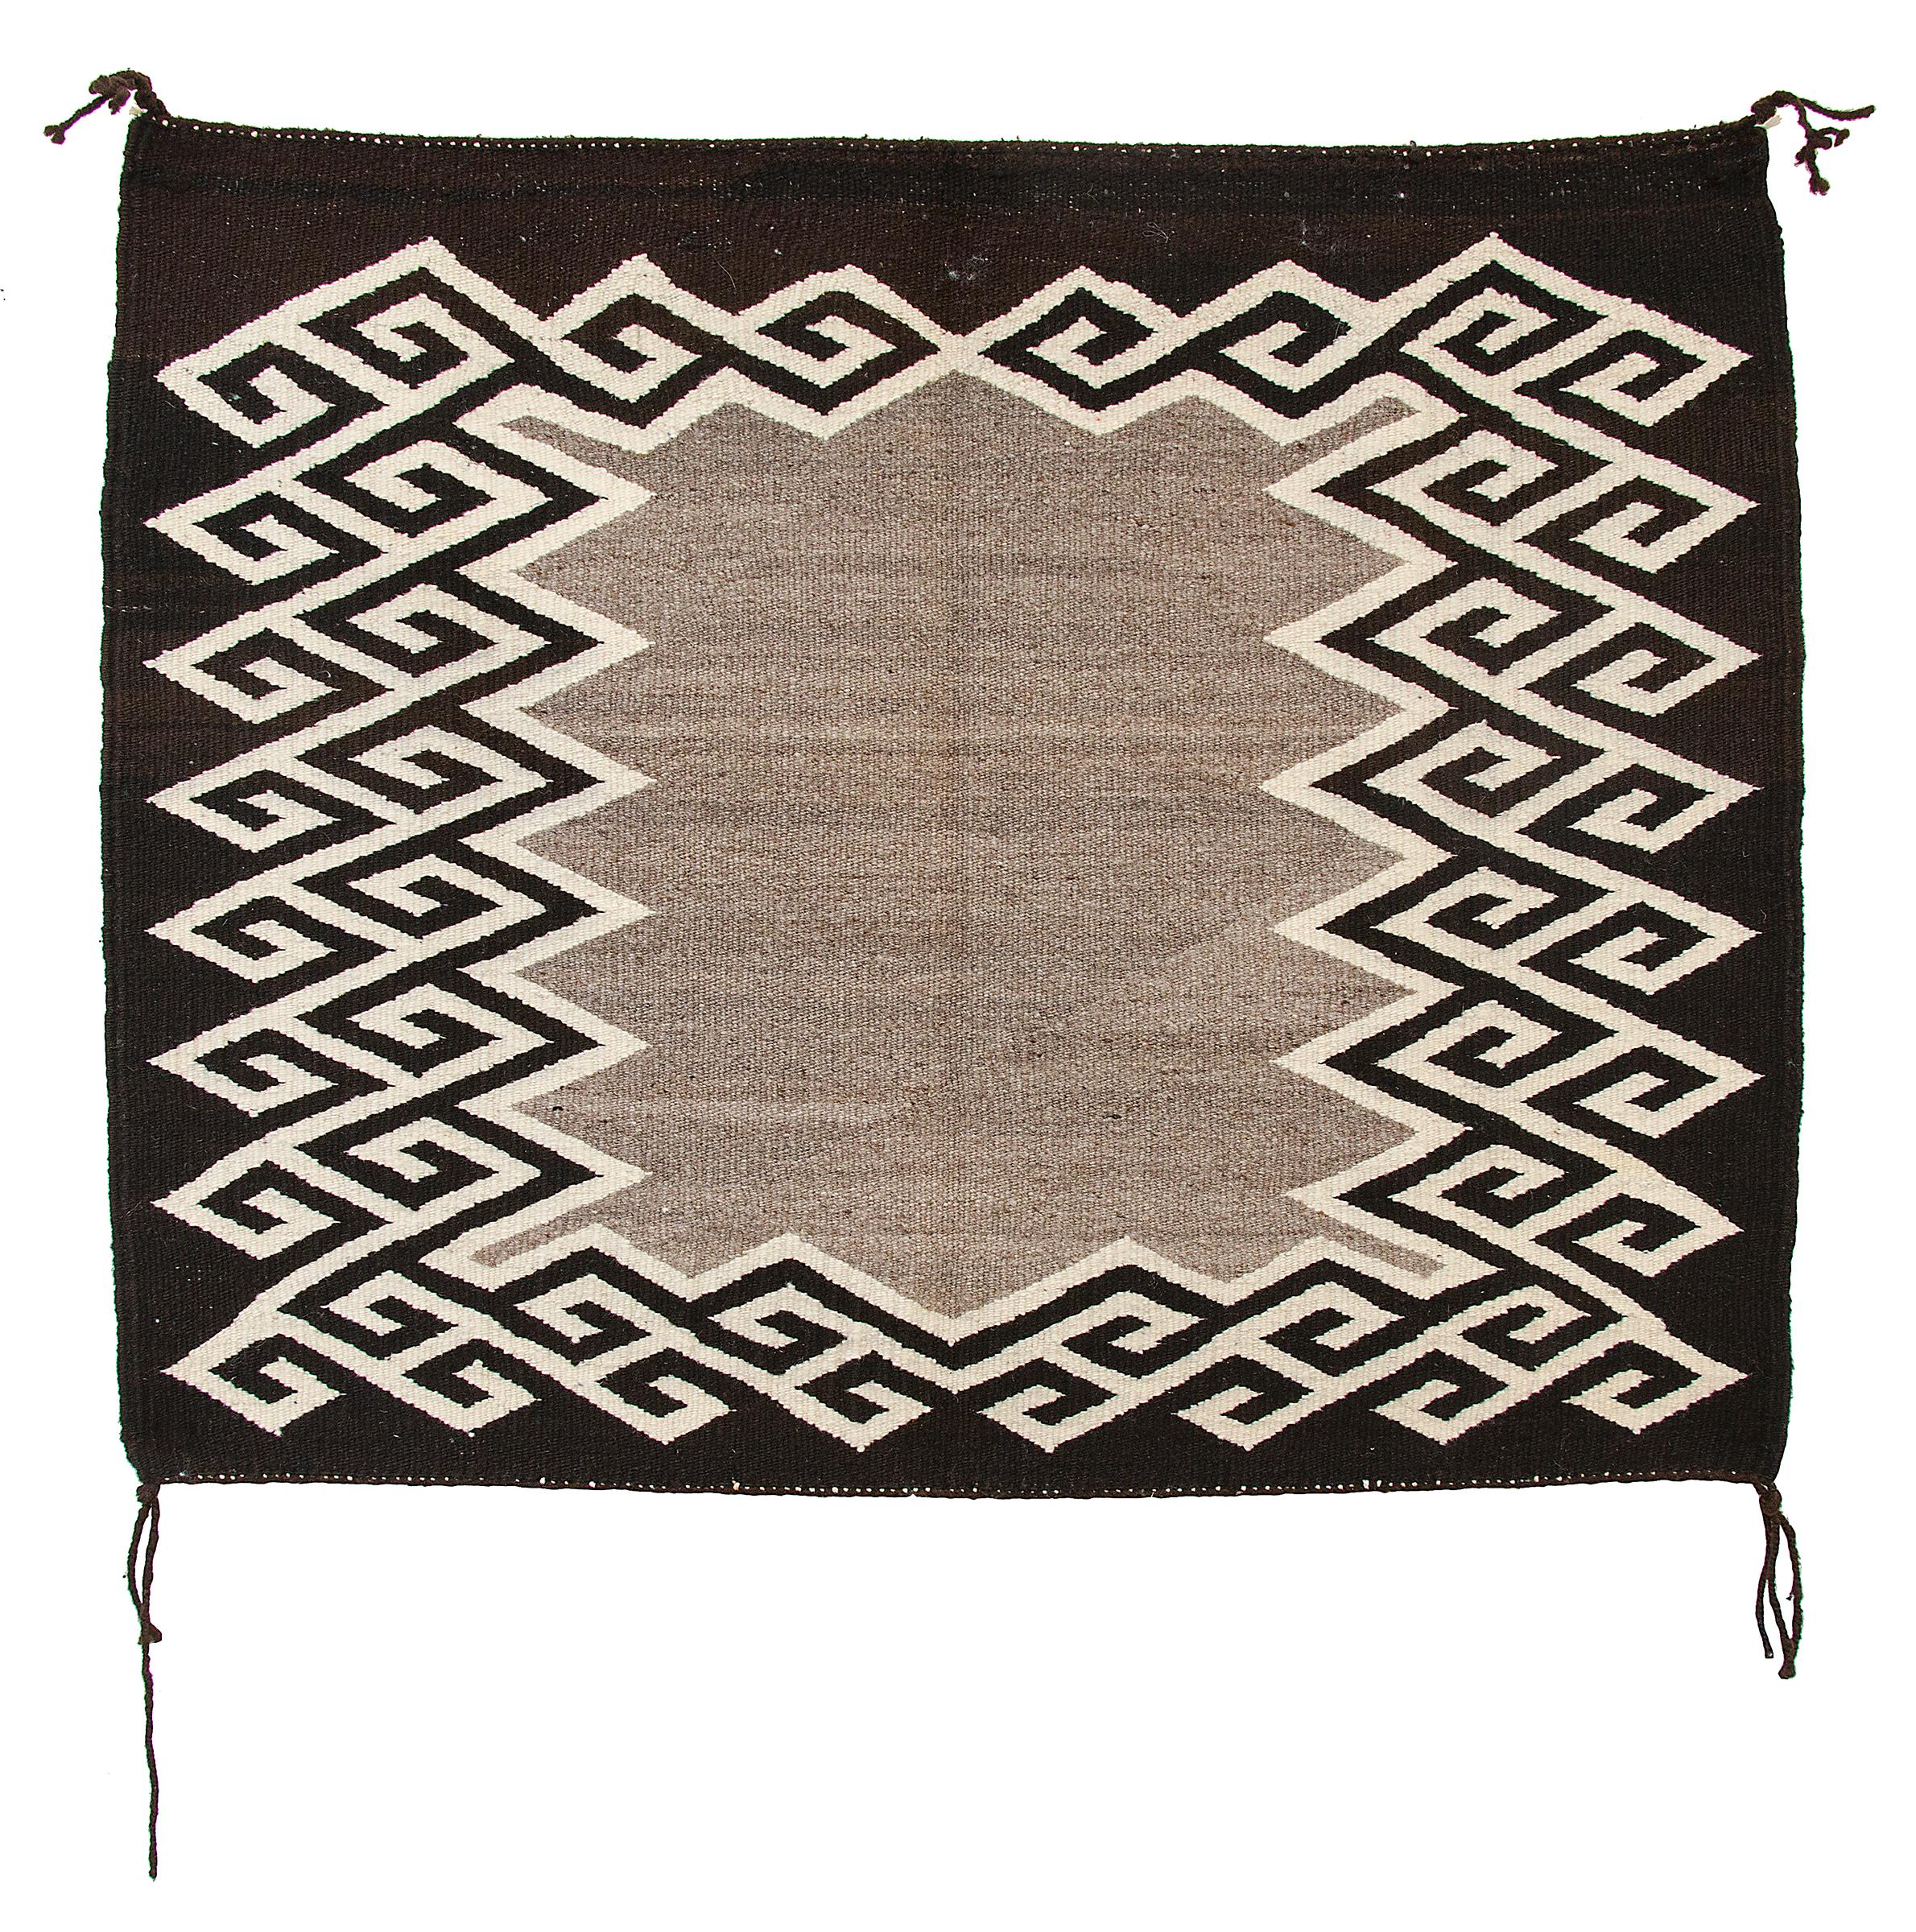 Vintage Navajo single saddle blanket, also known as a 